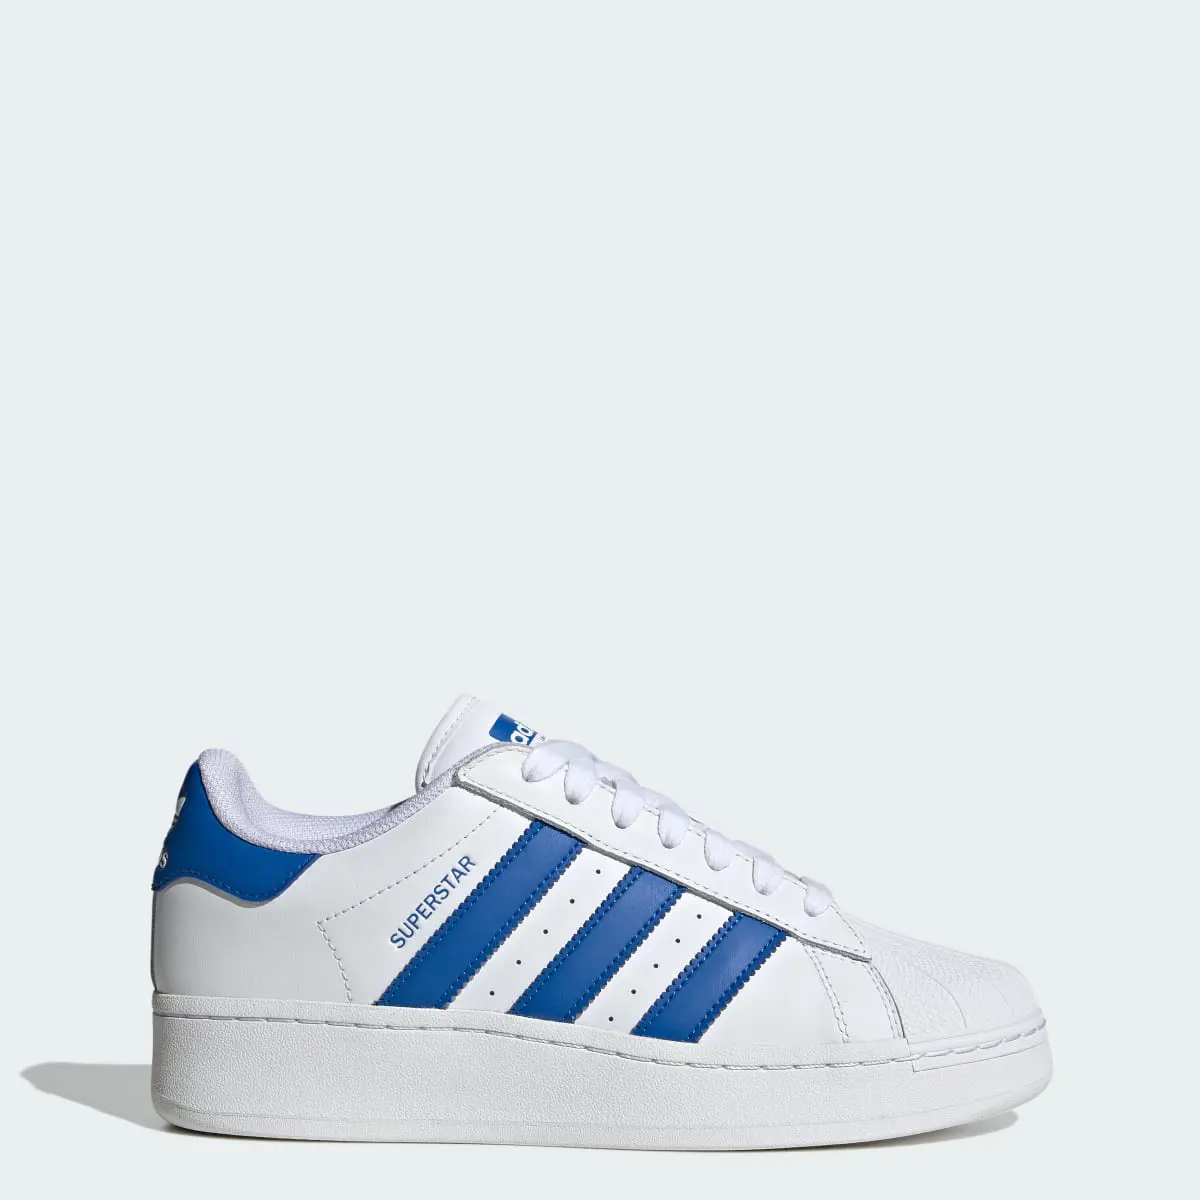 Adidas Superstar XLG Shoes. 1